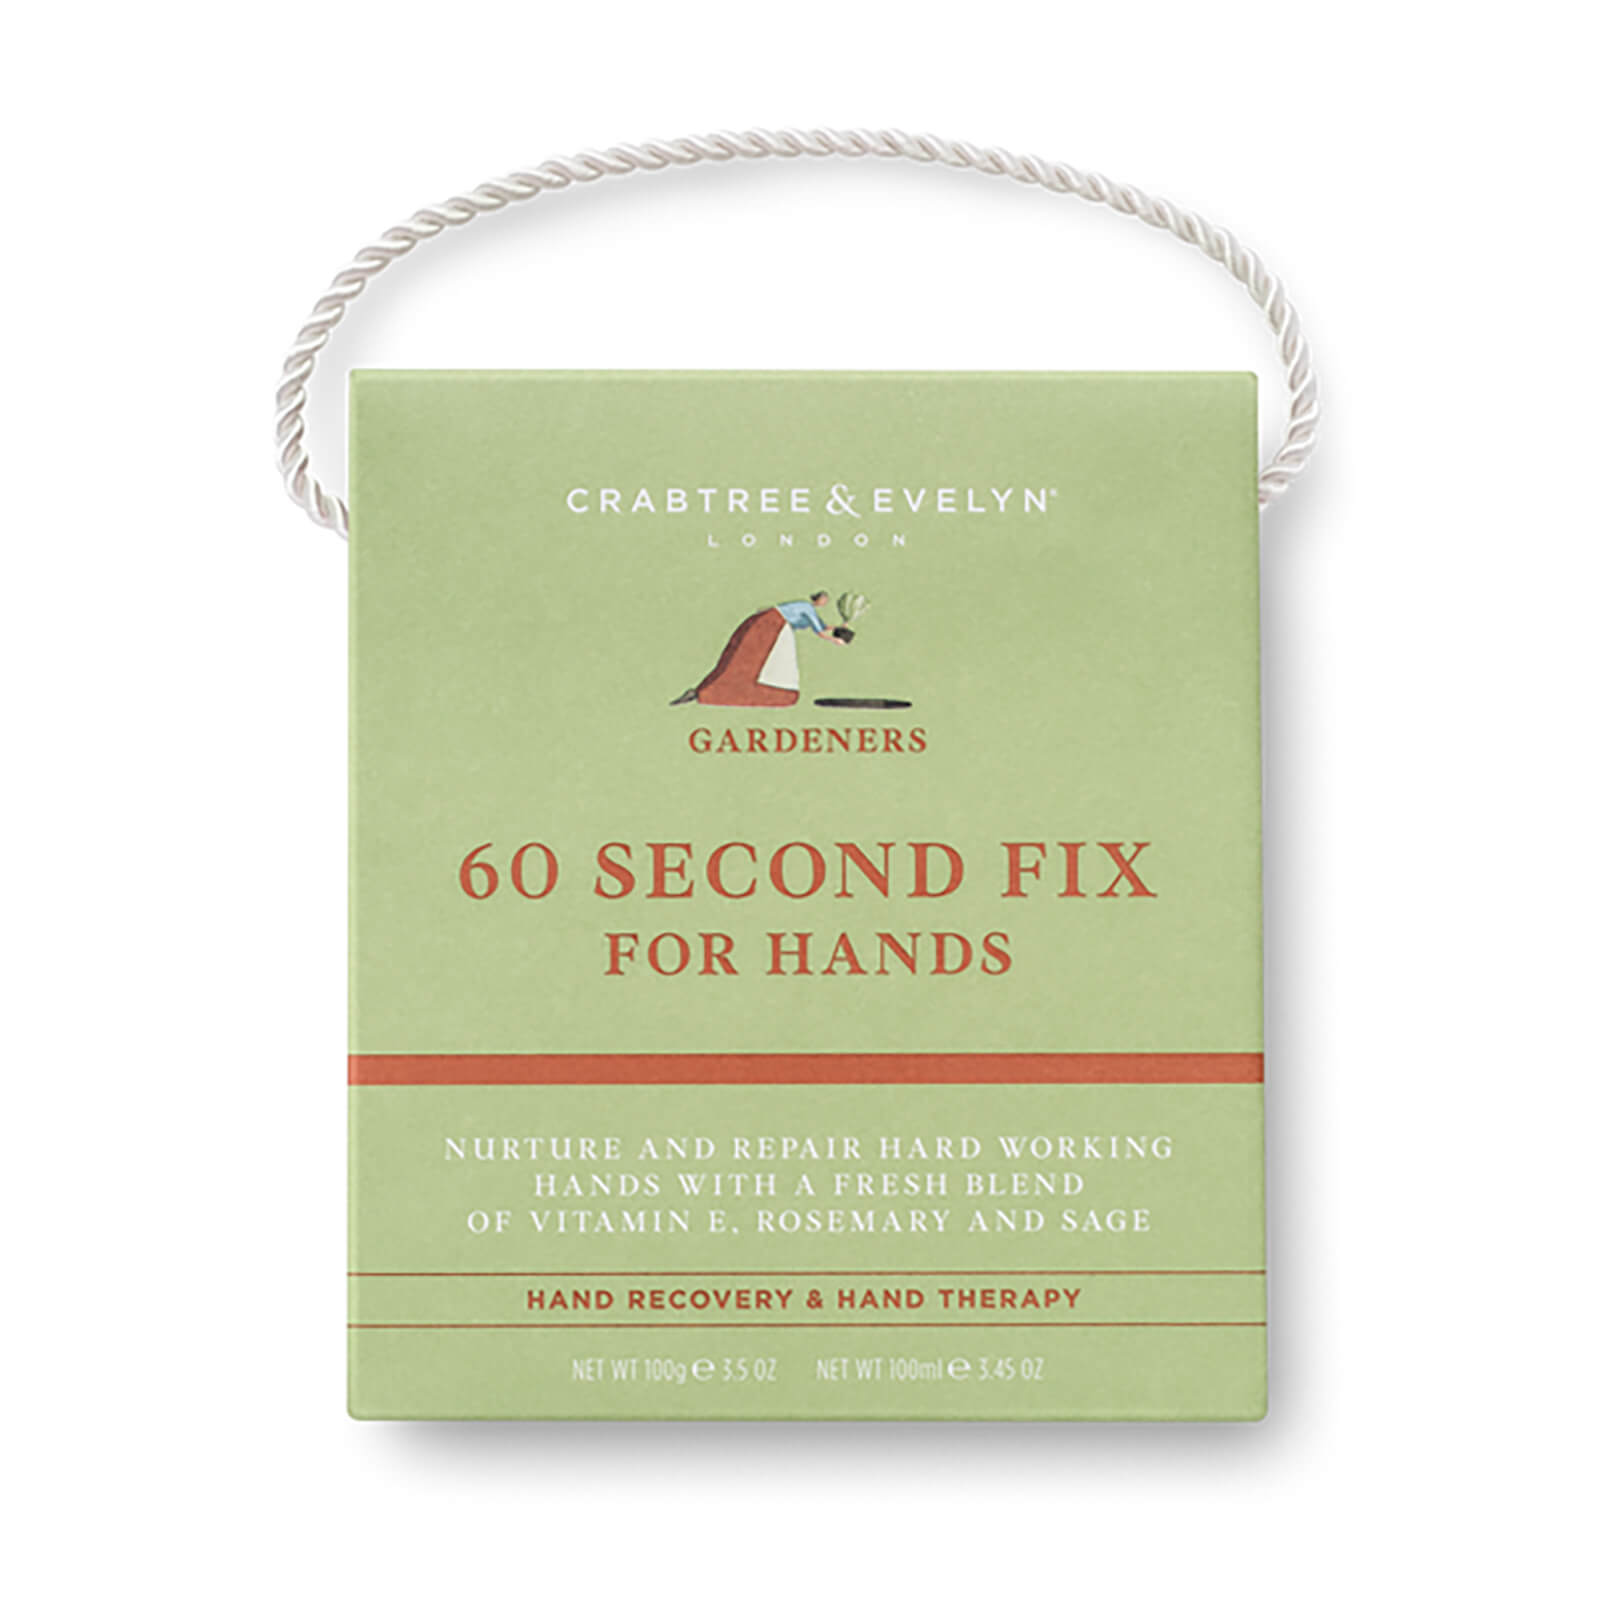 Crabtree & Evelyn Gardeners 60 Second Fix for Hands 100g